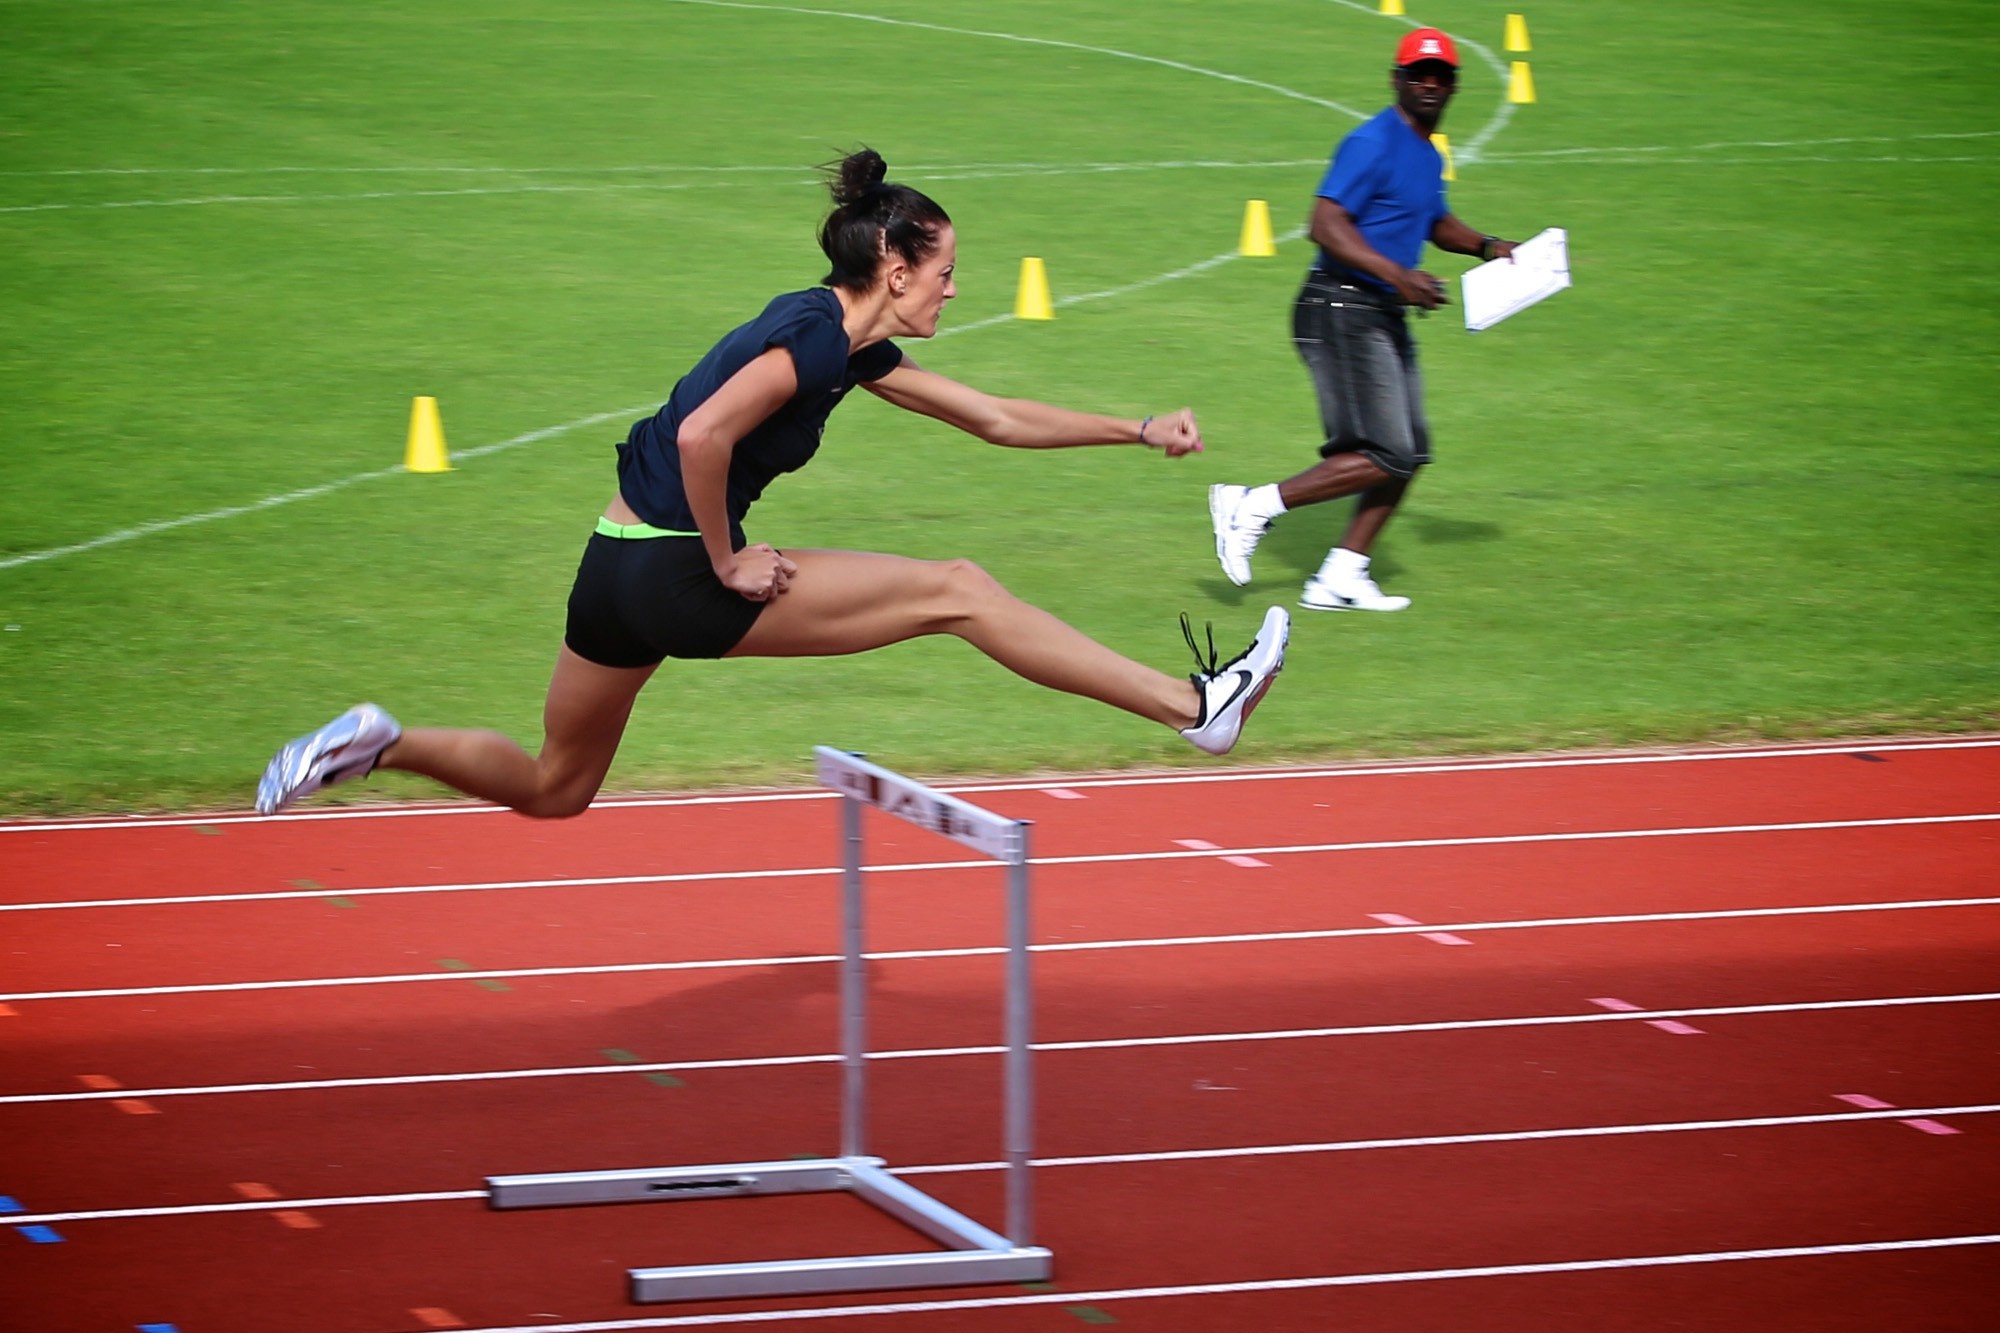 Hurdling: Track Shoes, Hurdles, Short distance running, Track and field tournament. 2000x1340 HD Background.